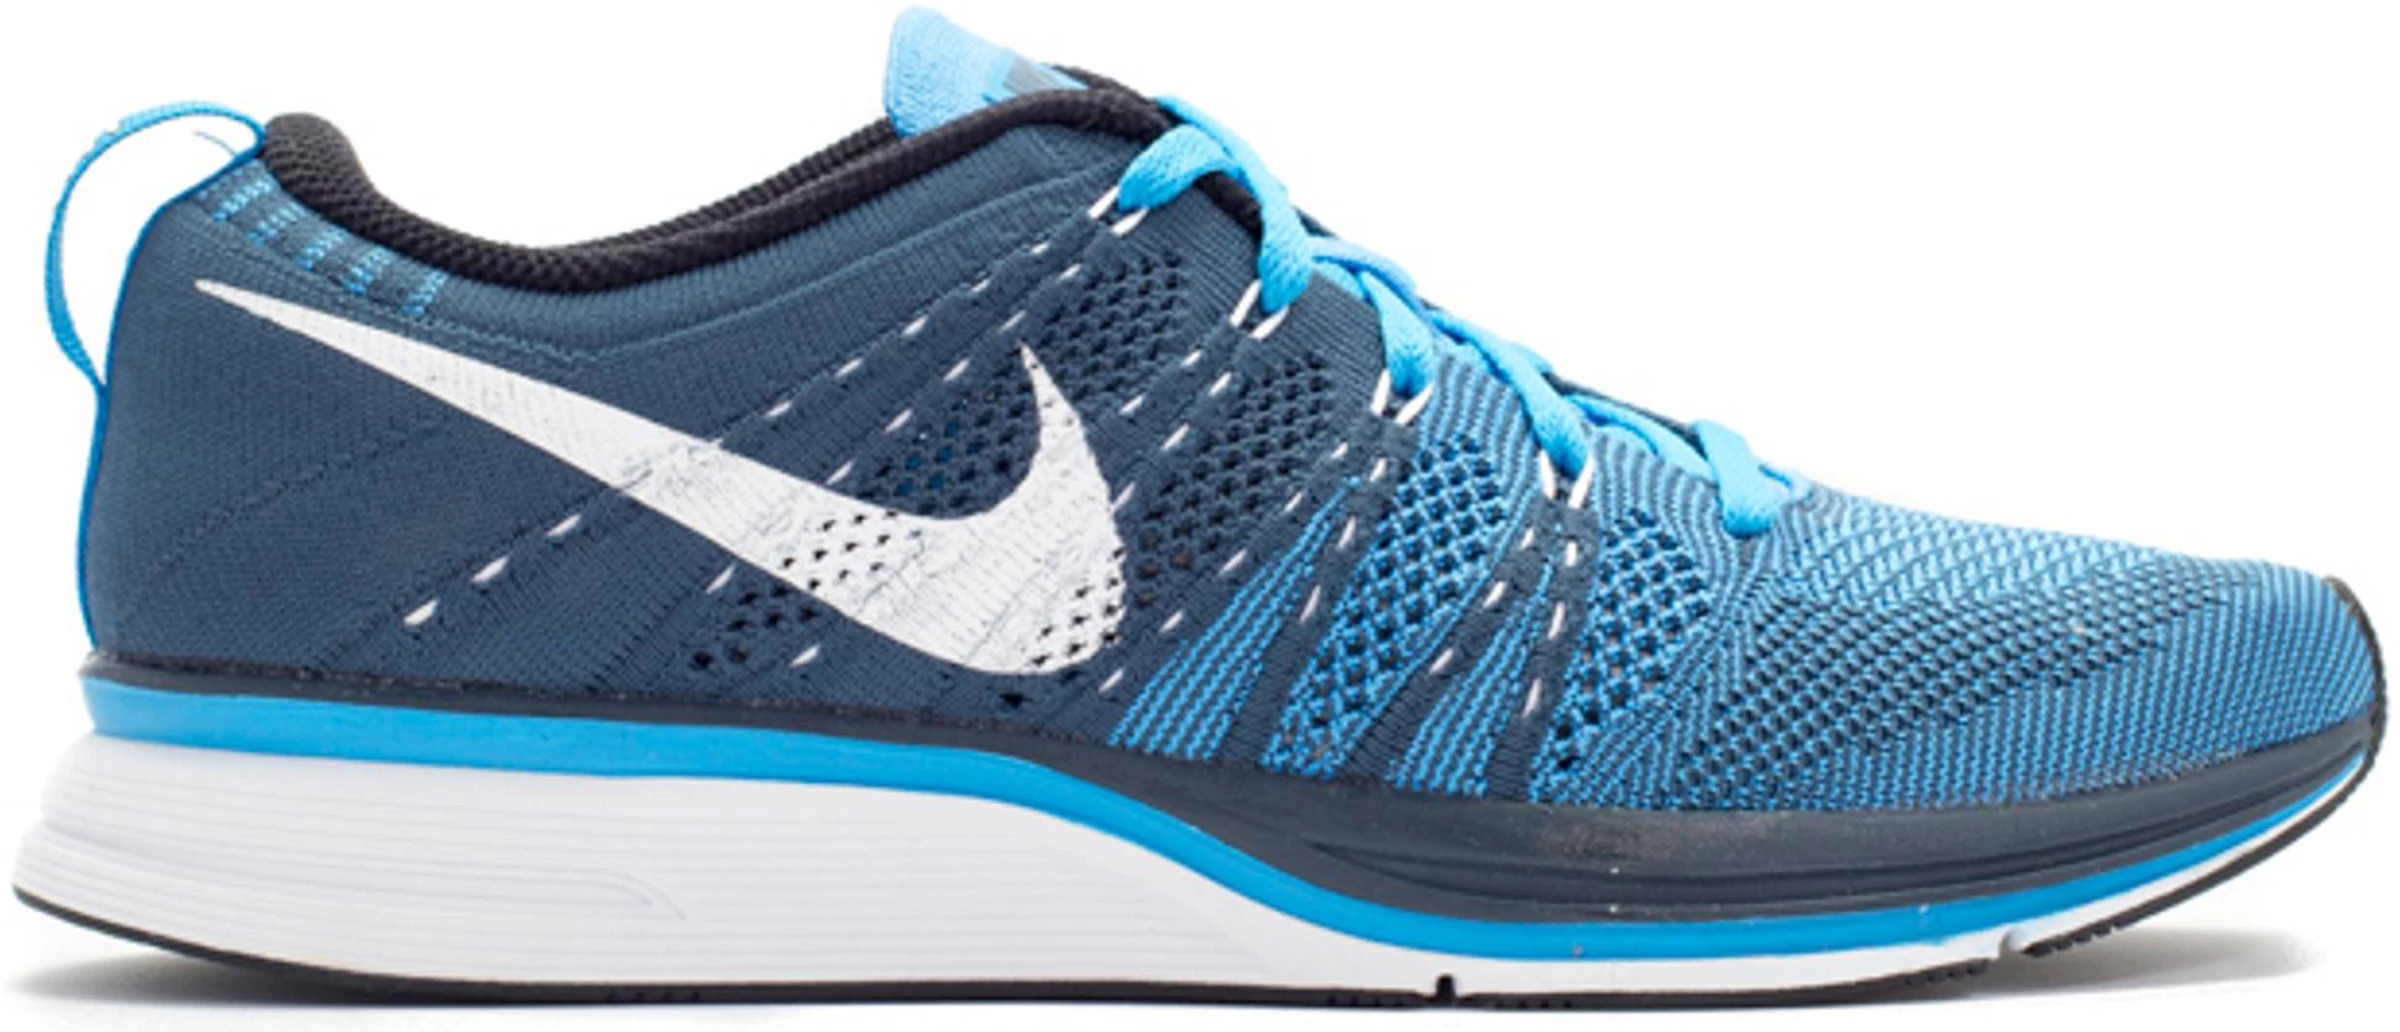 Flyknit Trainer+ Squadron - 532984-414 - US